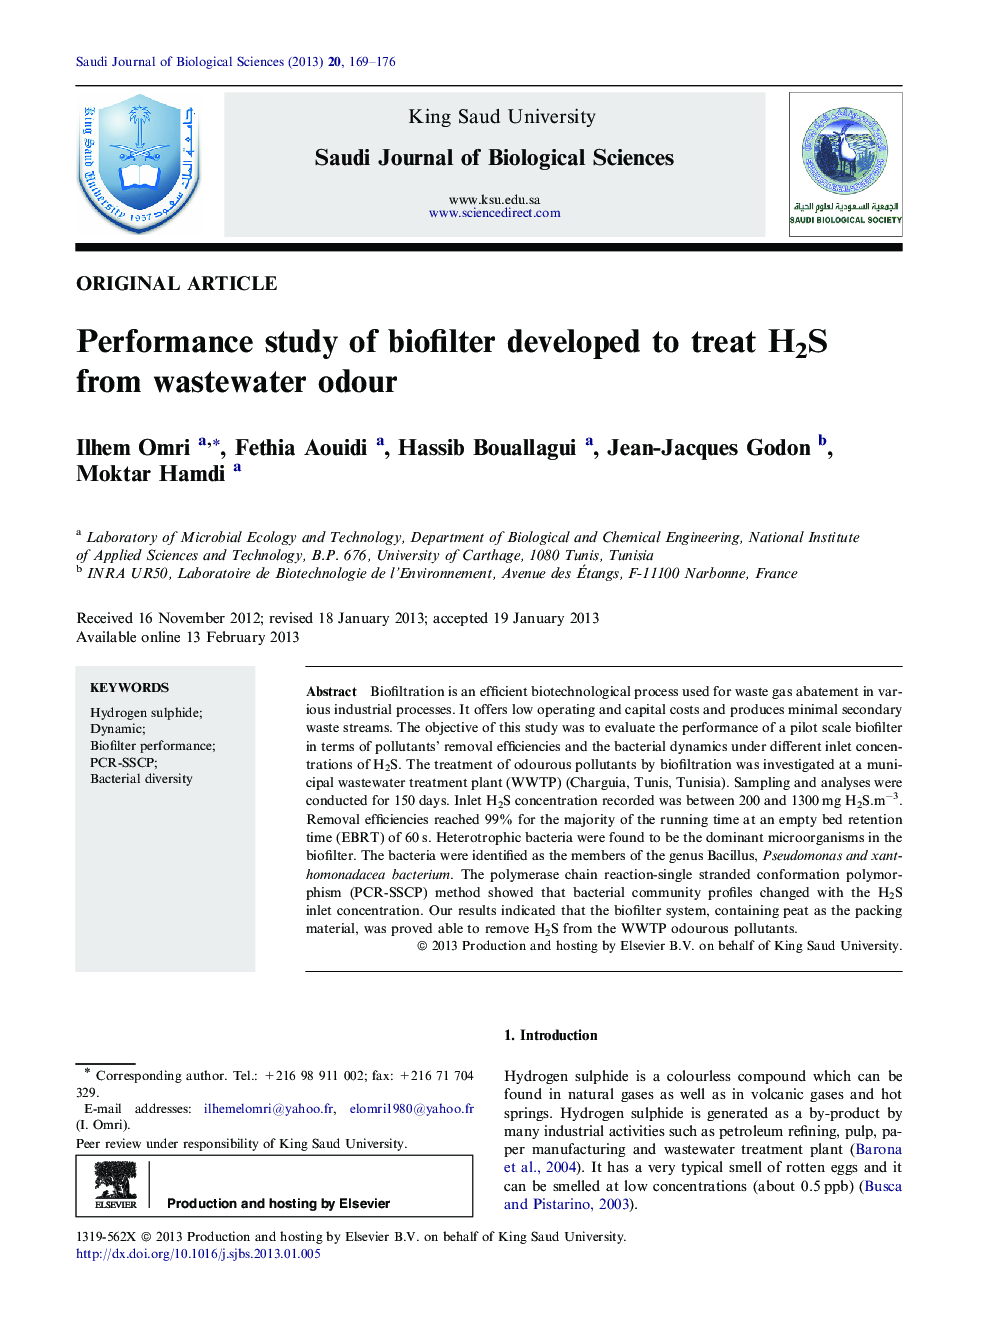 Performance study of biofilter developed to treat H2S from wastewater odour 